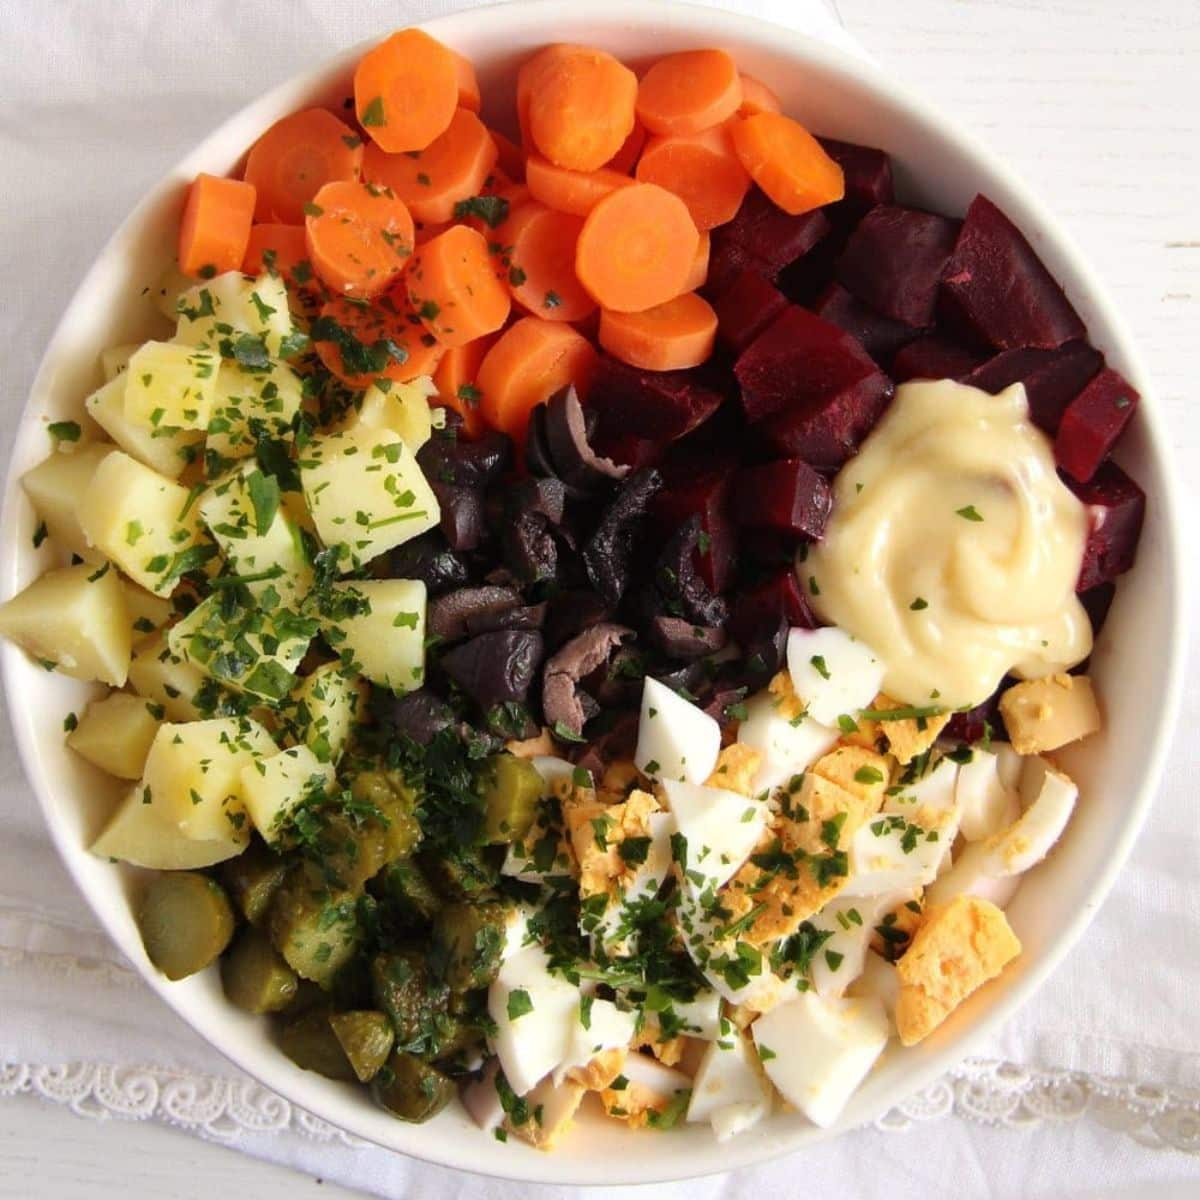 salad russe with carrots, potatoes, beets, eggs, olives and mayonnaise.